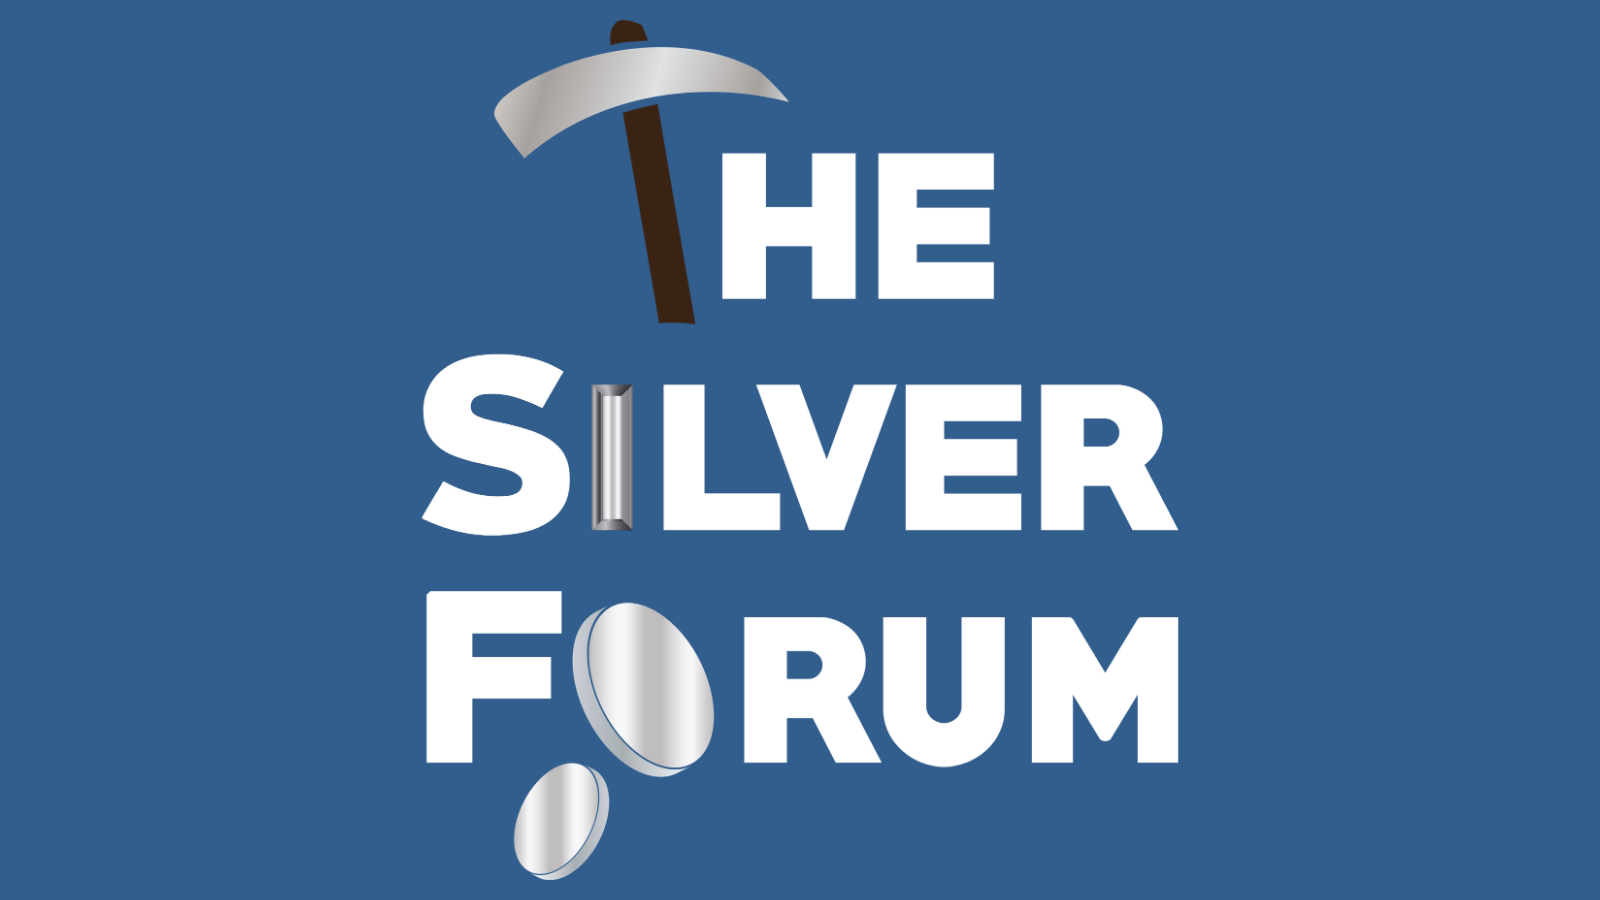 Mse forum investing in silver crypto nick scammer